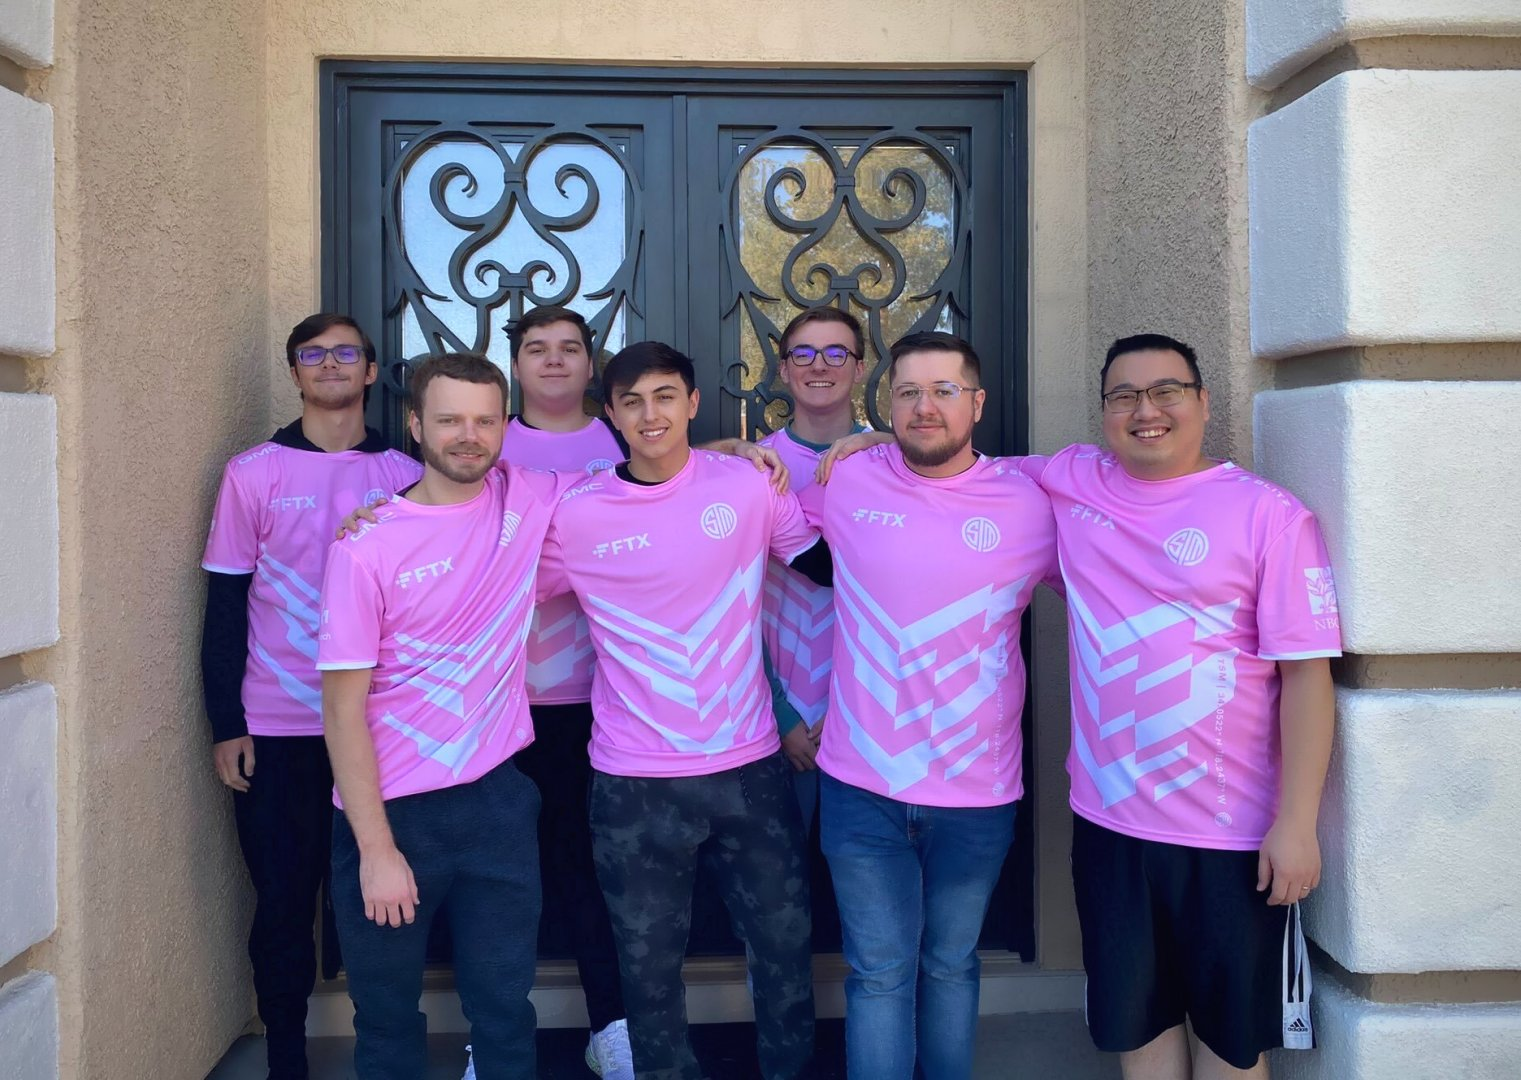 The R6 roster for TSM stand together in their pink jerseys